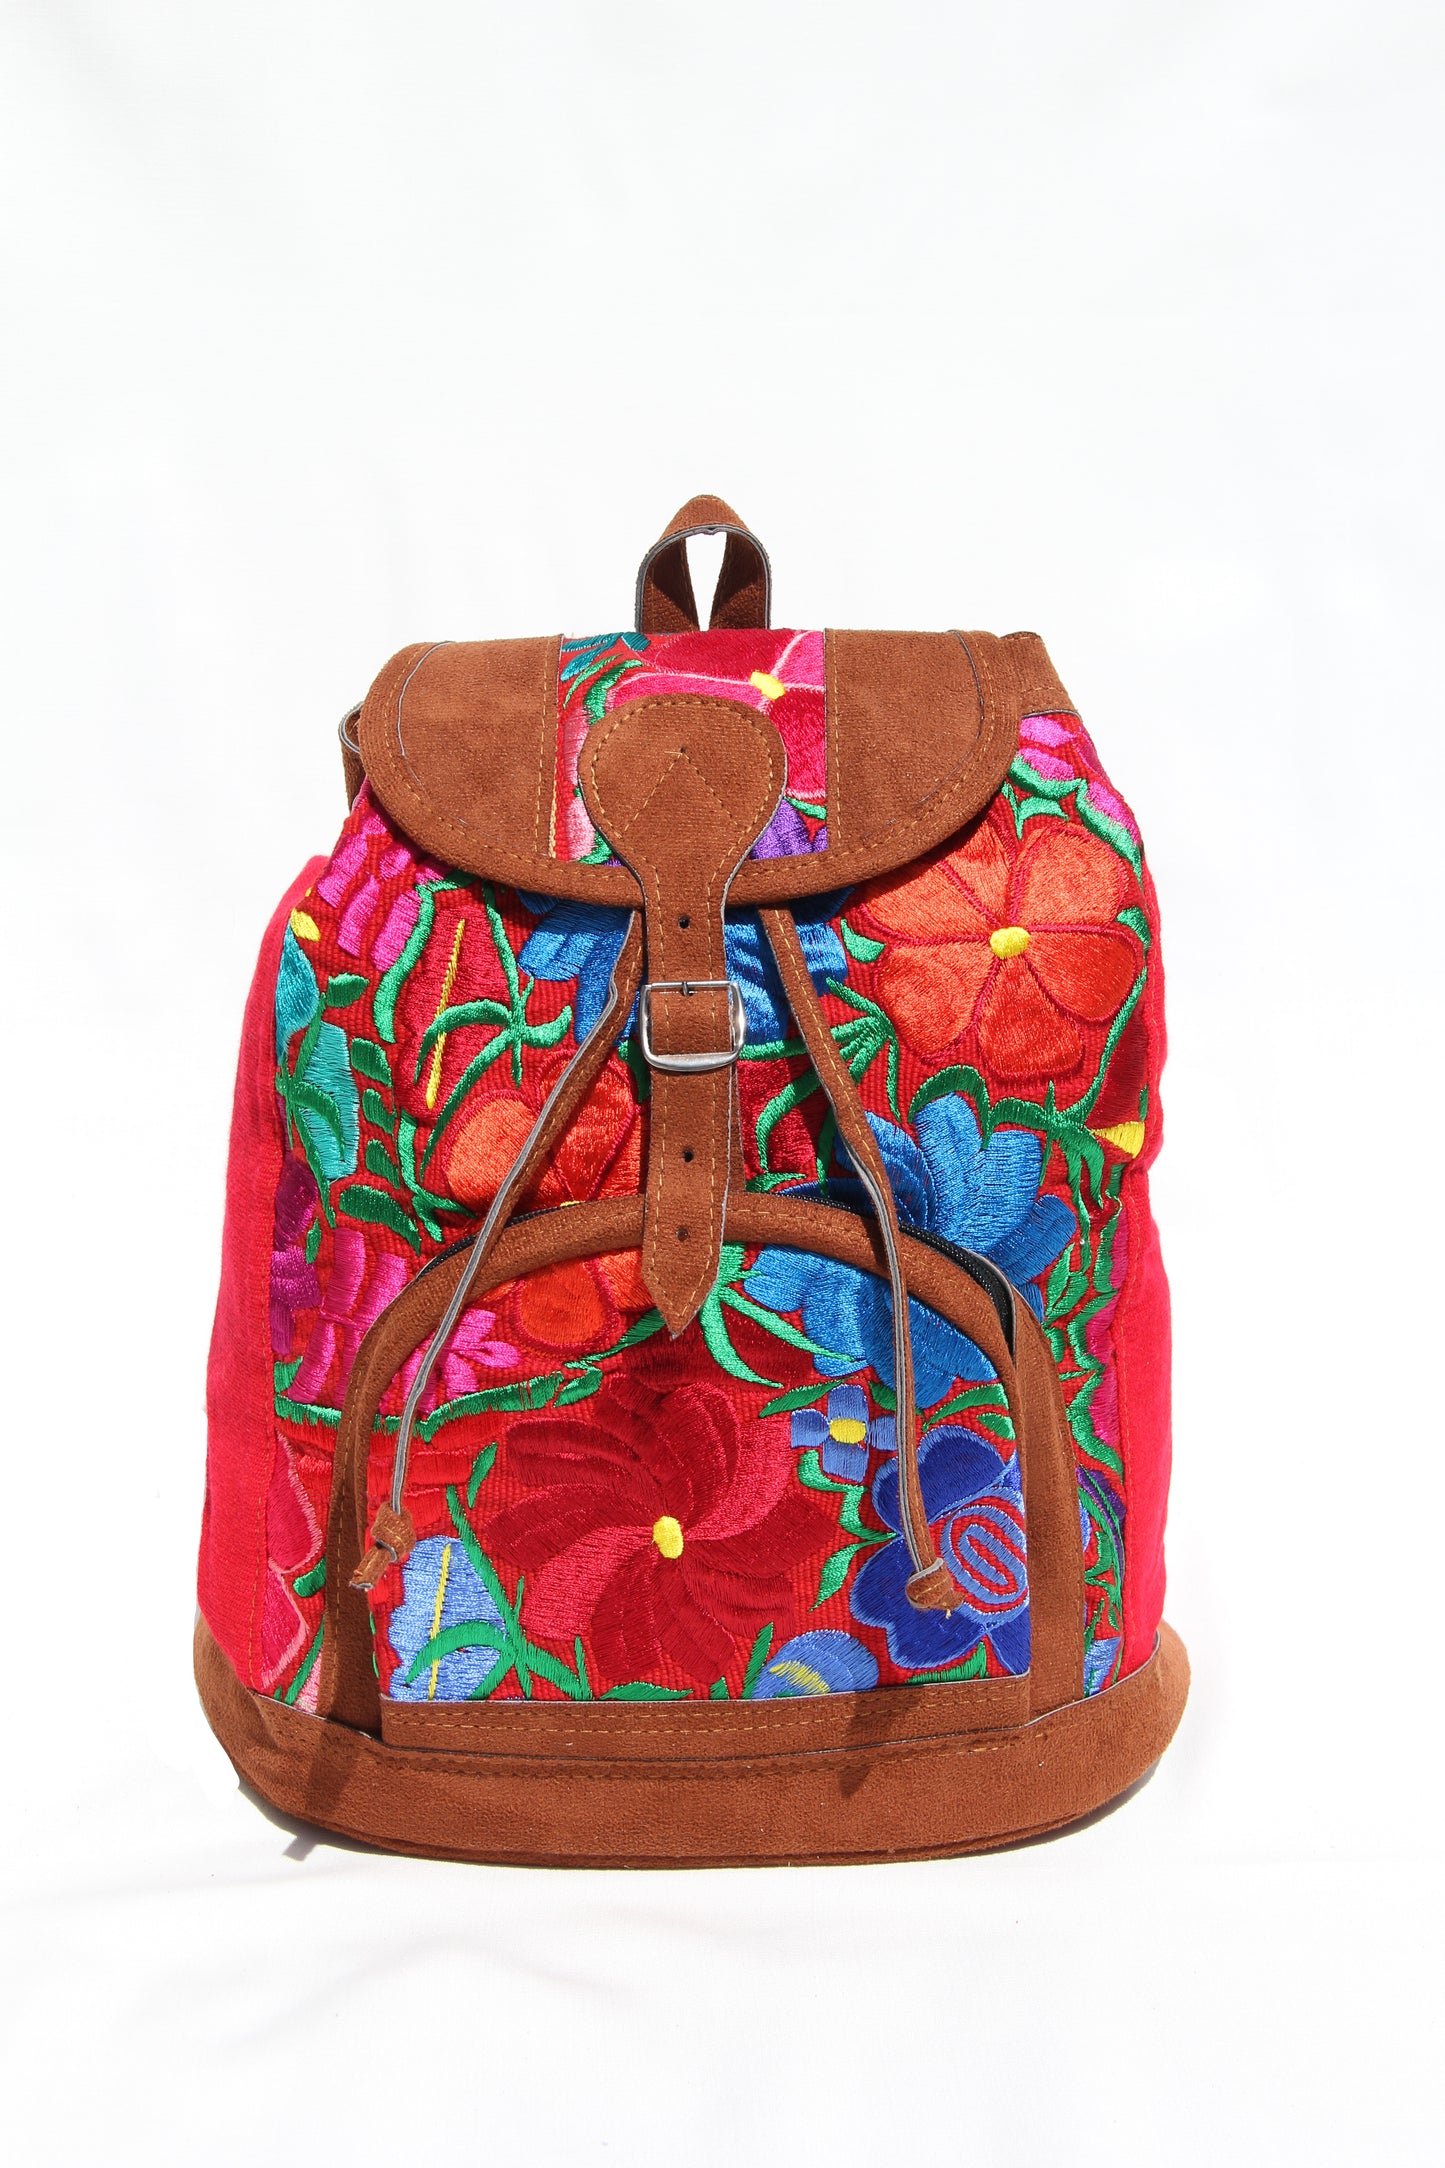 colorful huipil floral embroidery backpack with red woven fabric and faux suede contrast with adjustable straps and front buckle closure with front zipper pocket the prefect travel, hiking or beach bag unique bag great for back to school take this bag on your next destination boho bag and hippie style bag a great standout accessories made in Guatemala